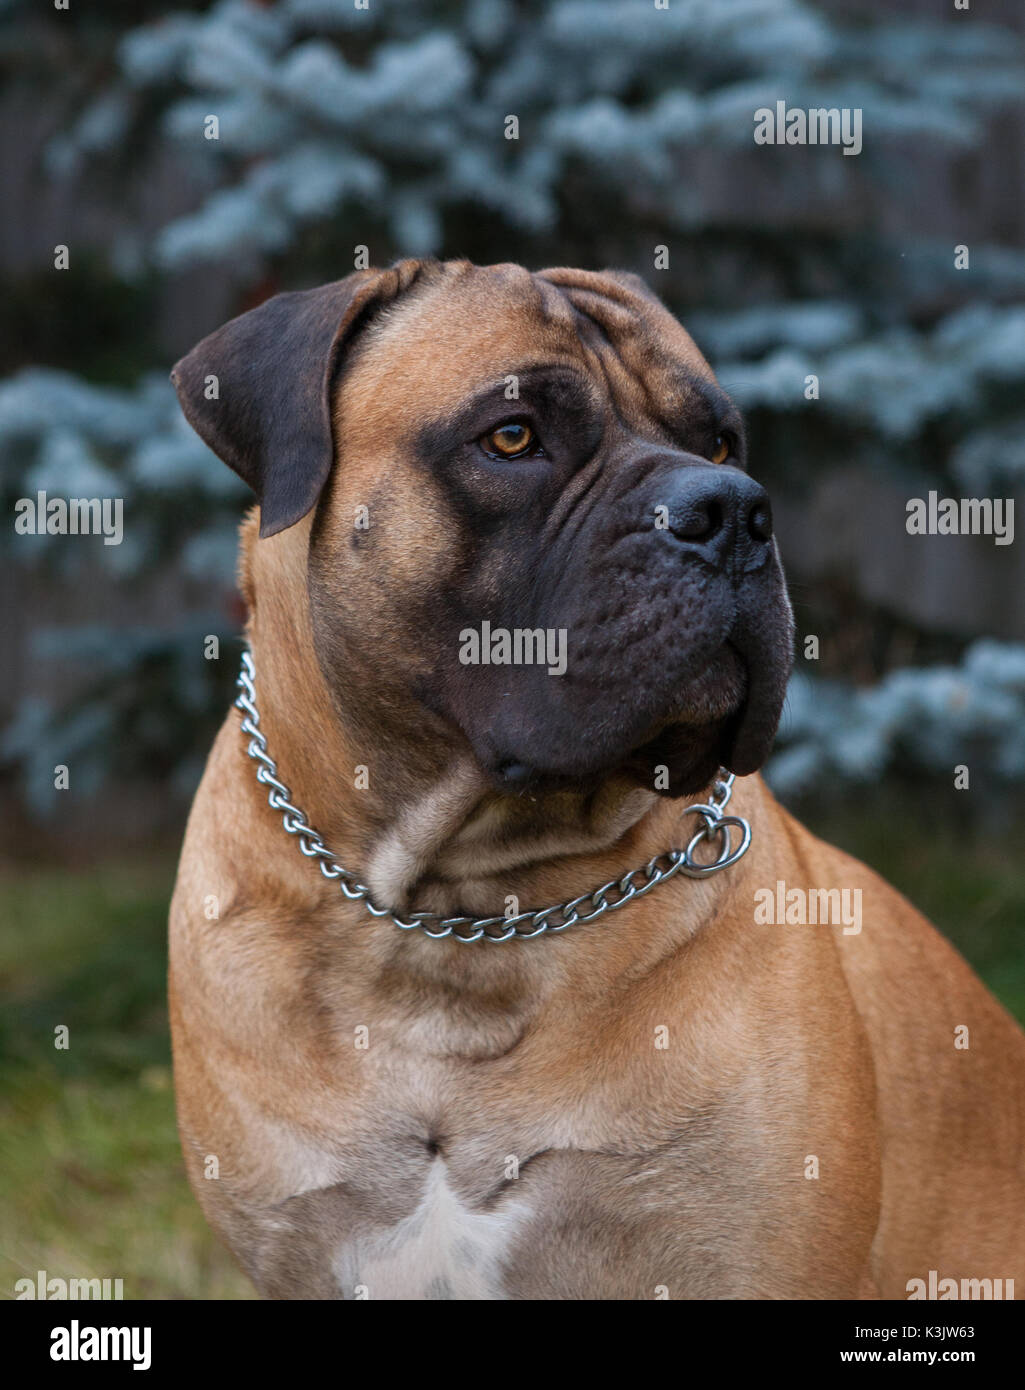 Closeup portrait of a rare breed of dog - South African Boerboel (South African Mastiff) Stock Photo